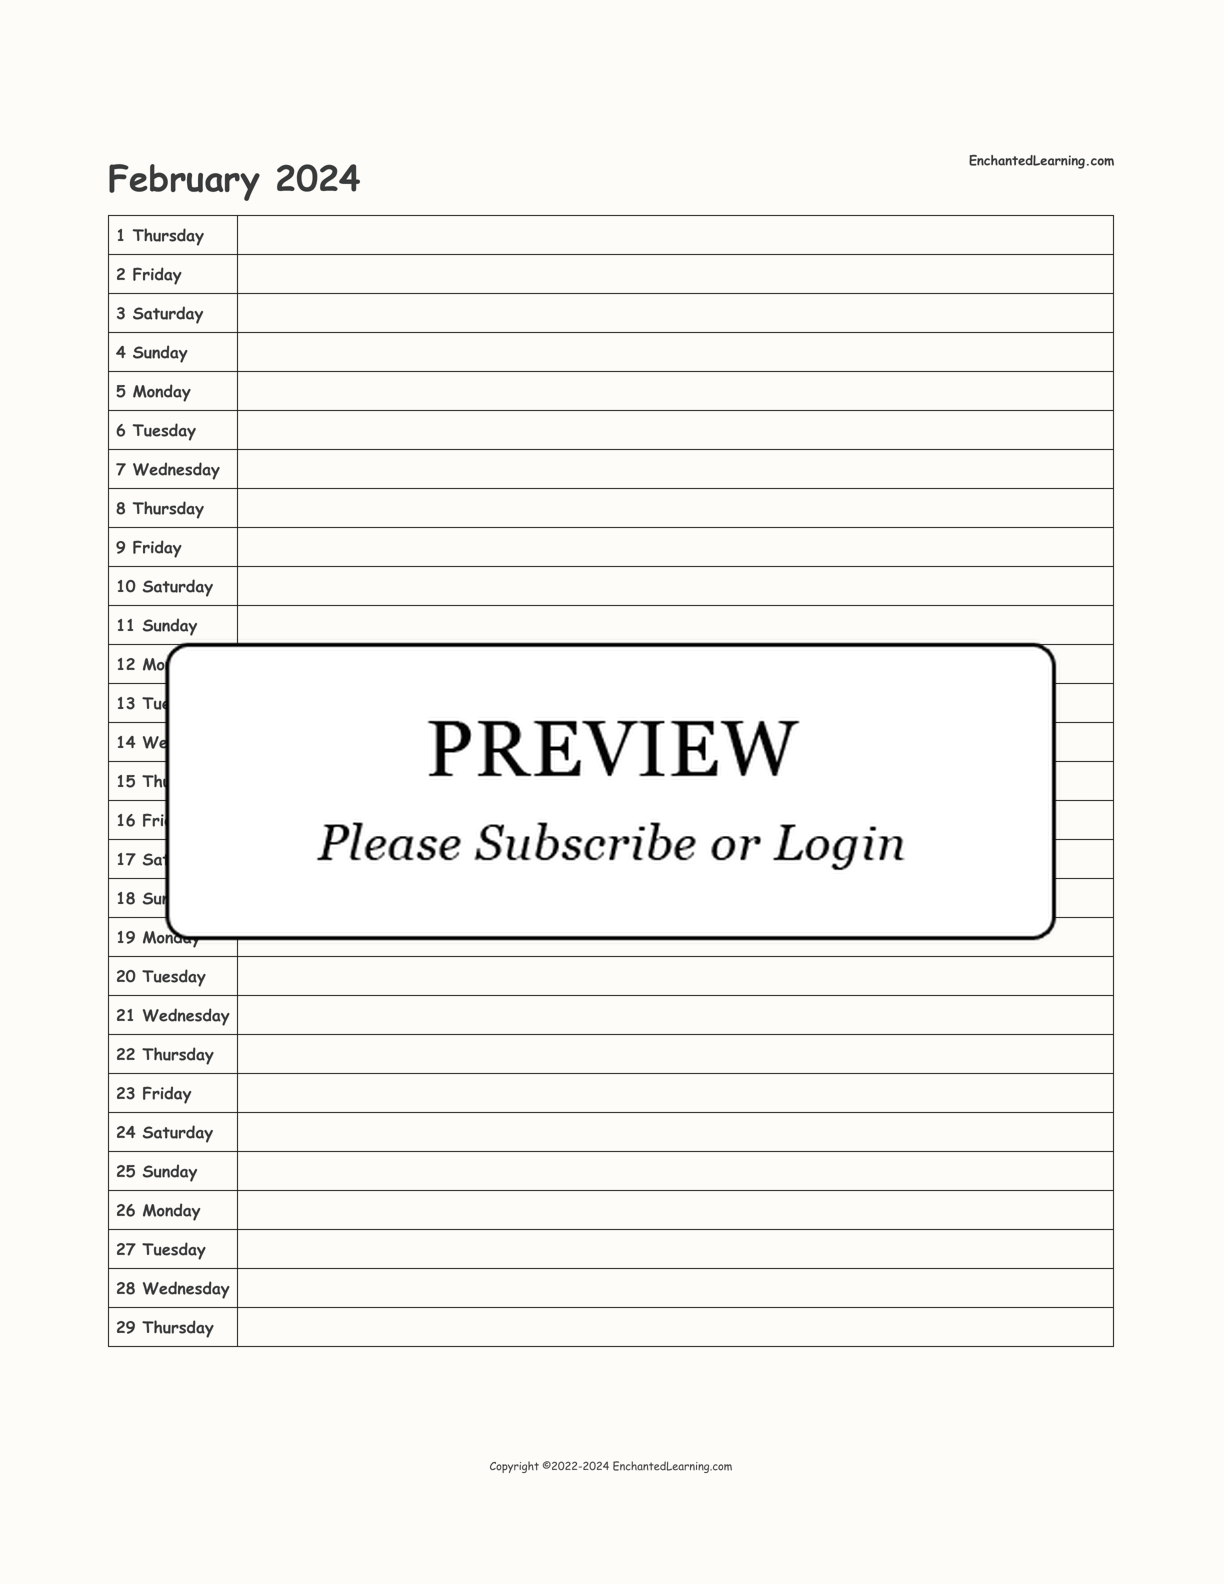 2024 Scheduling Calendar interactive printout page 2